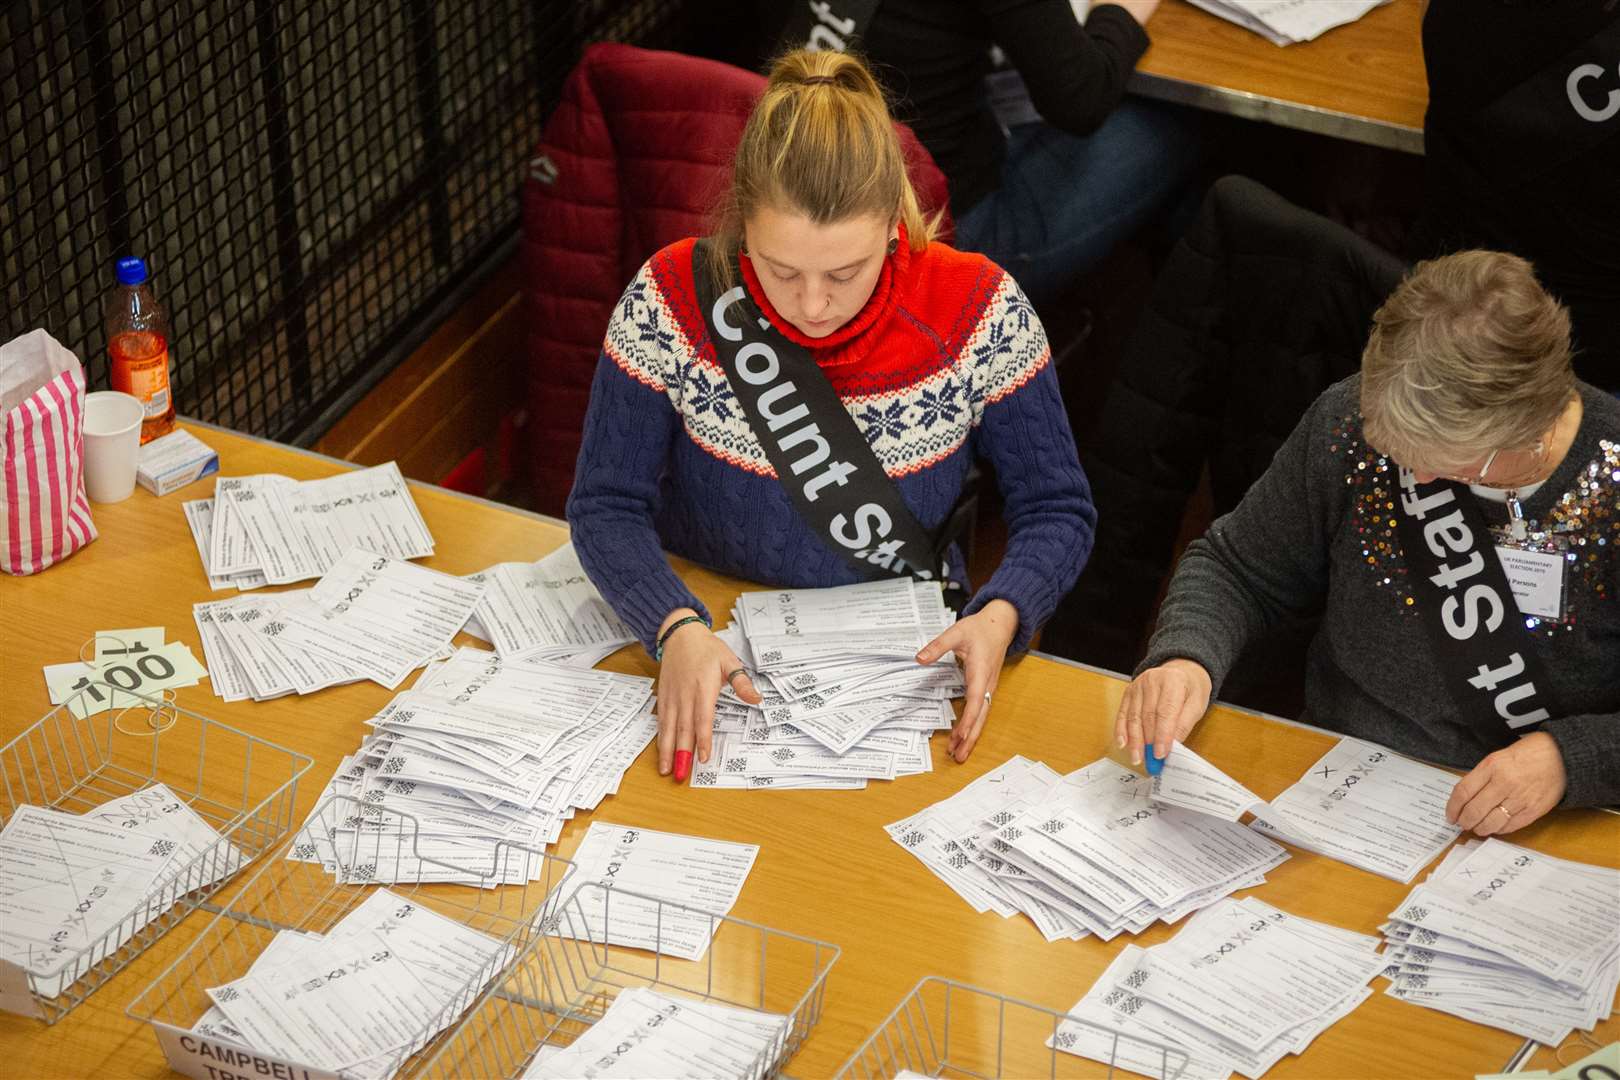 Thousands of votes will be cast and counted this year.